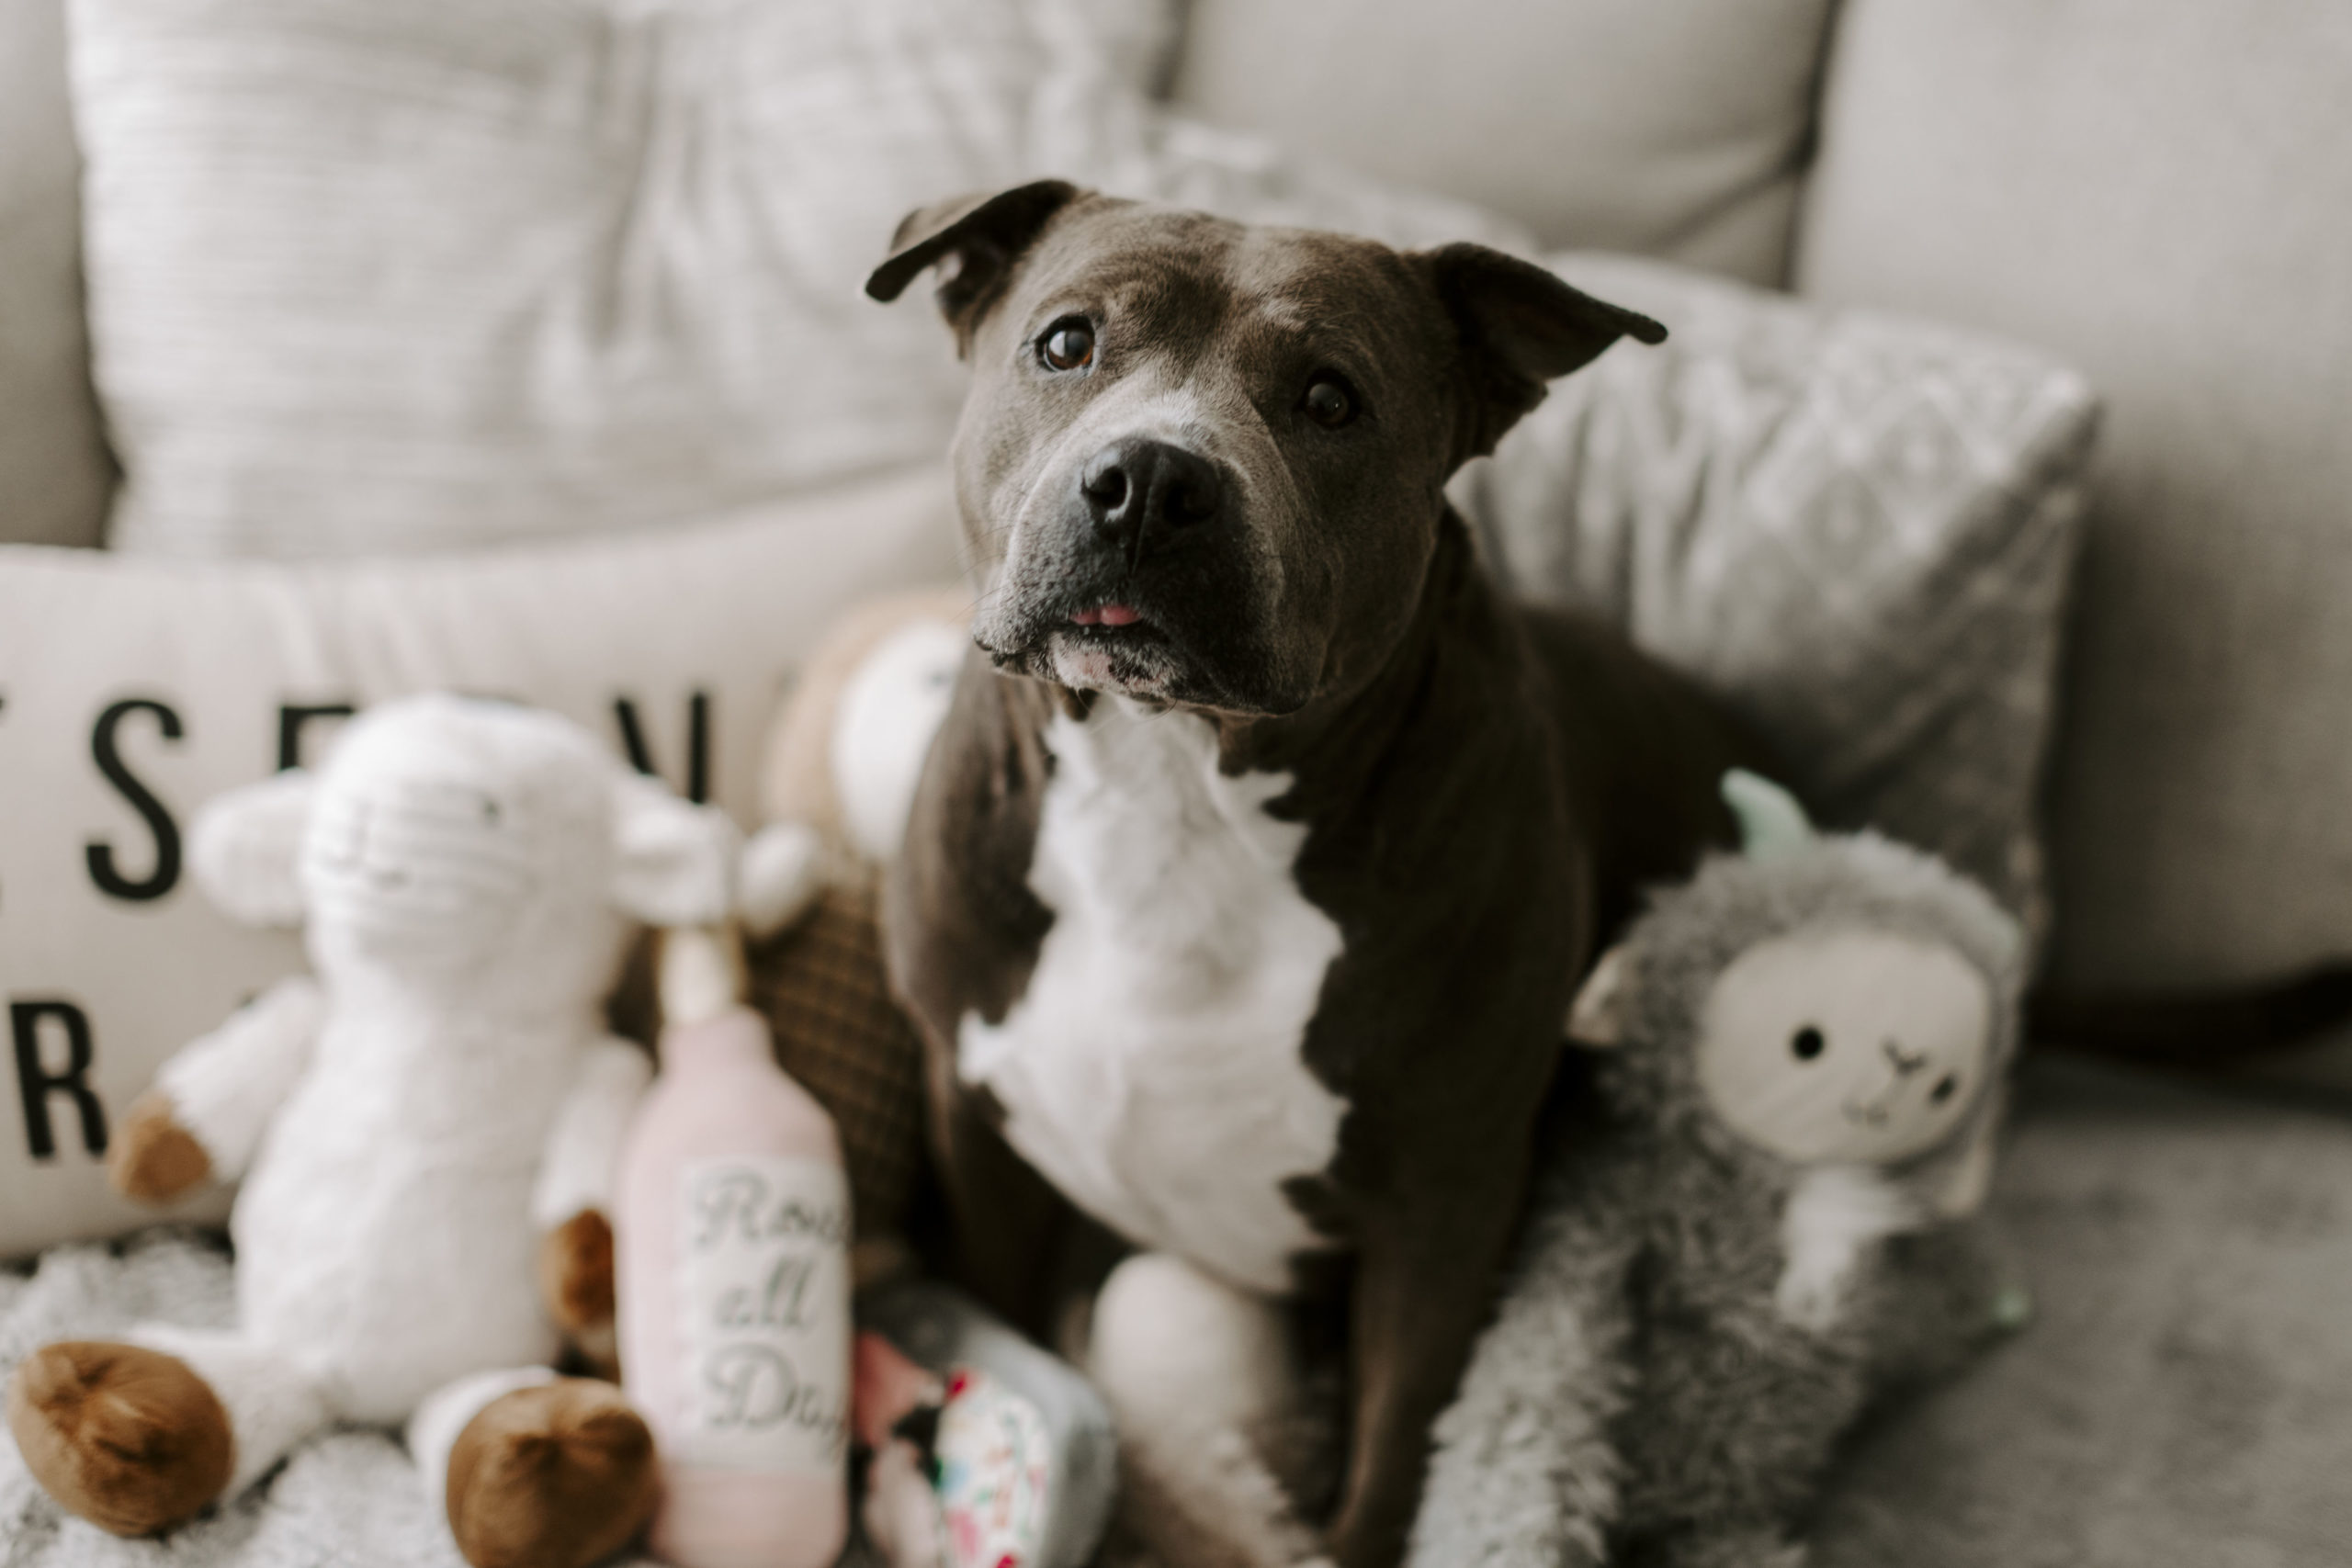 Ady the pitbull sits on a couch surrounded by stuffed toys for national dog day